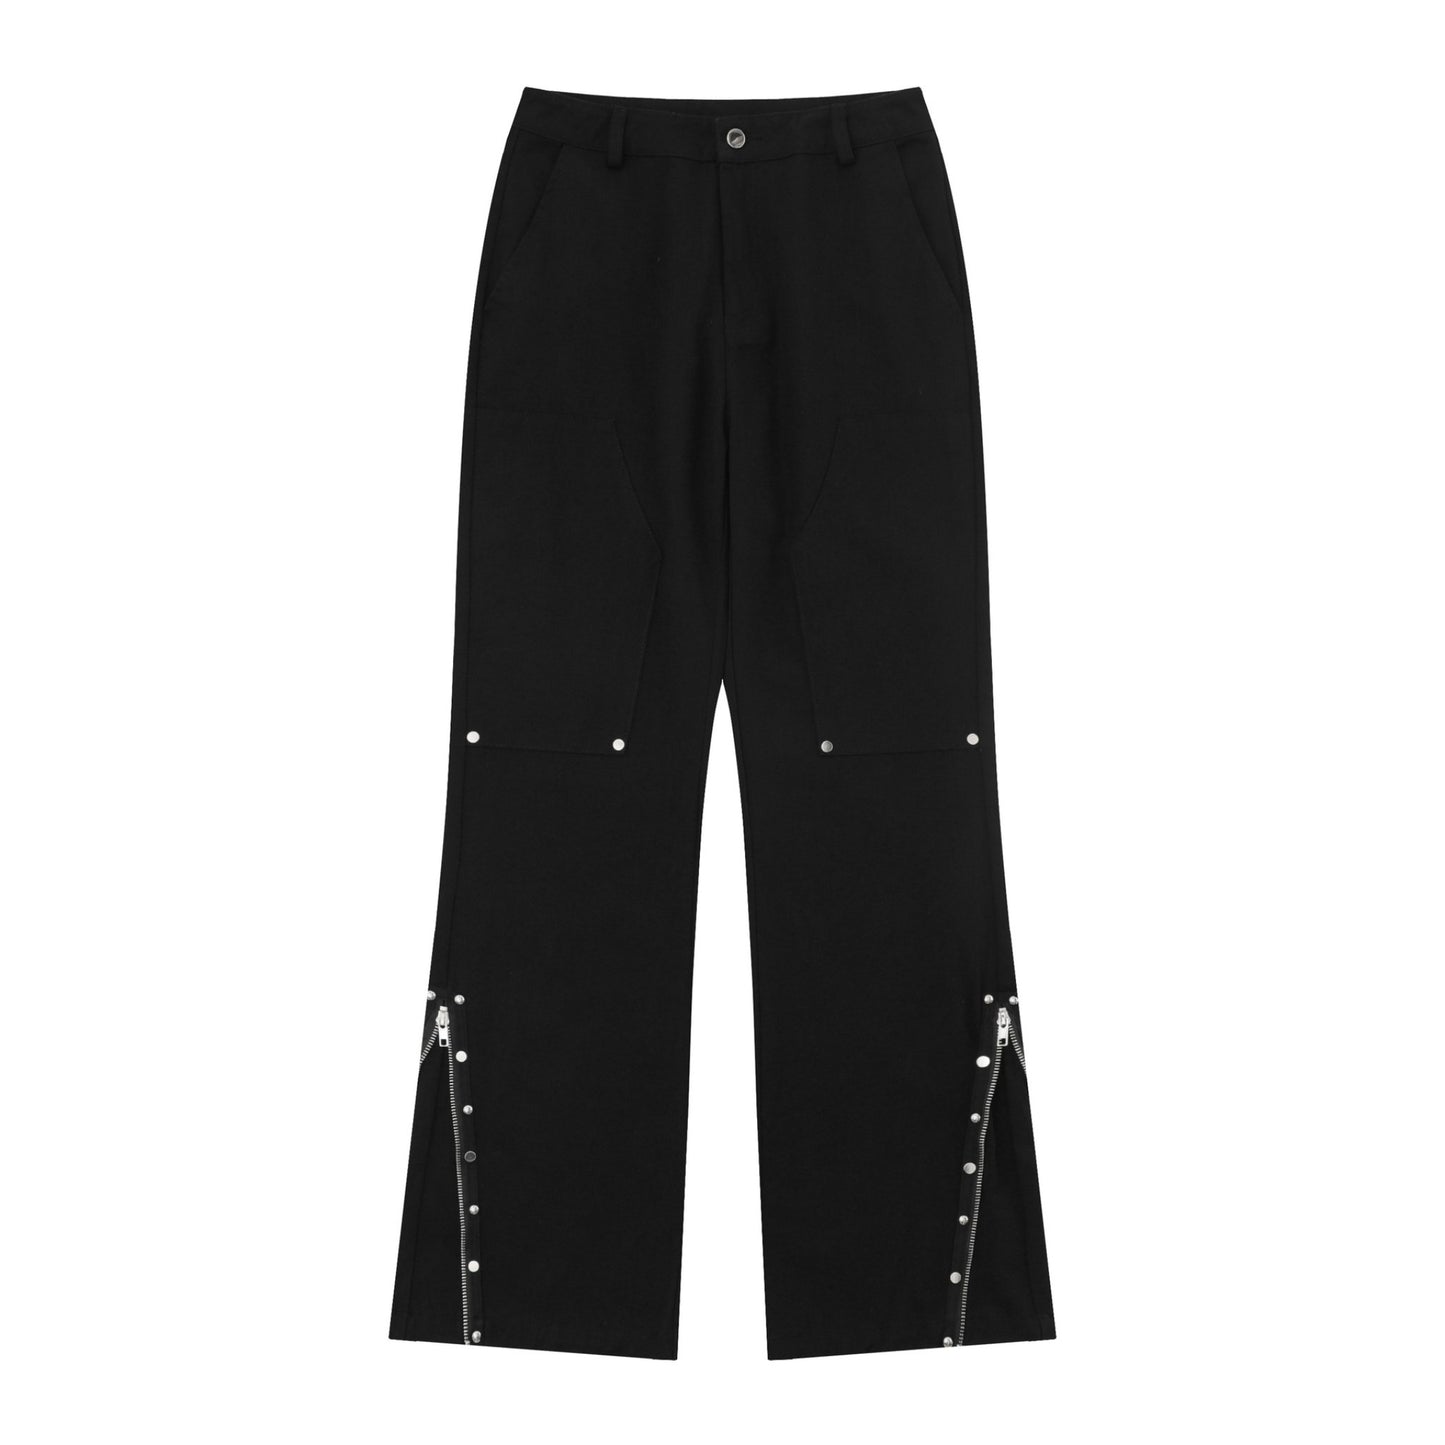 Unisex 2 Colors Black and Gray Zippered Bootcut Trousers